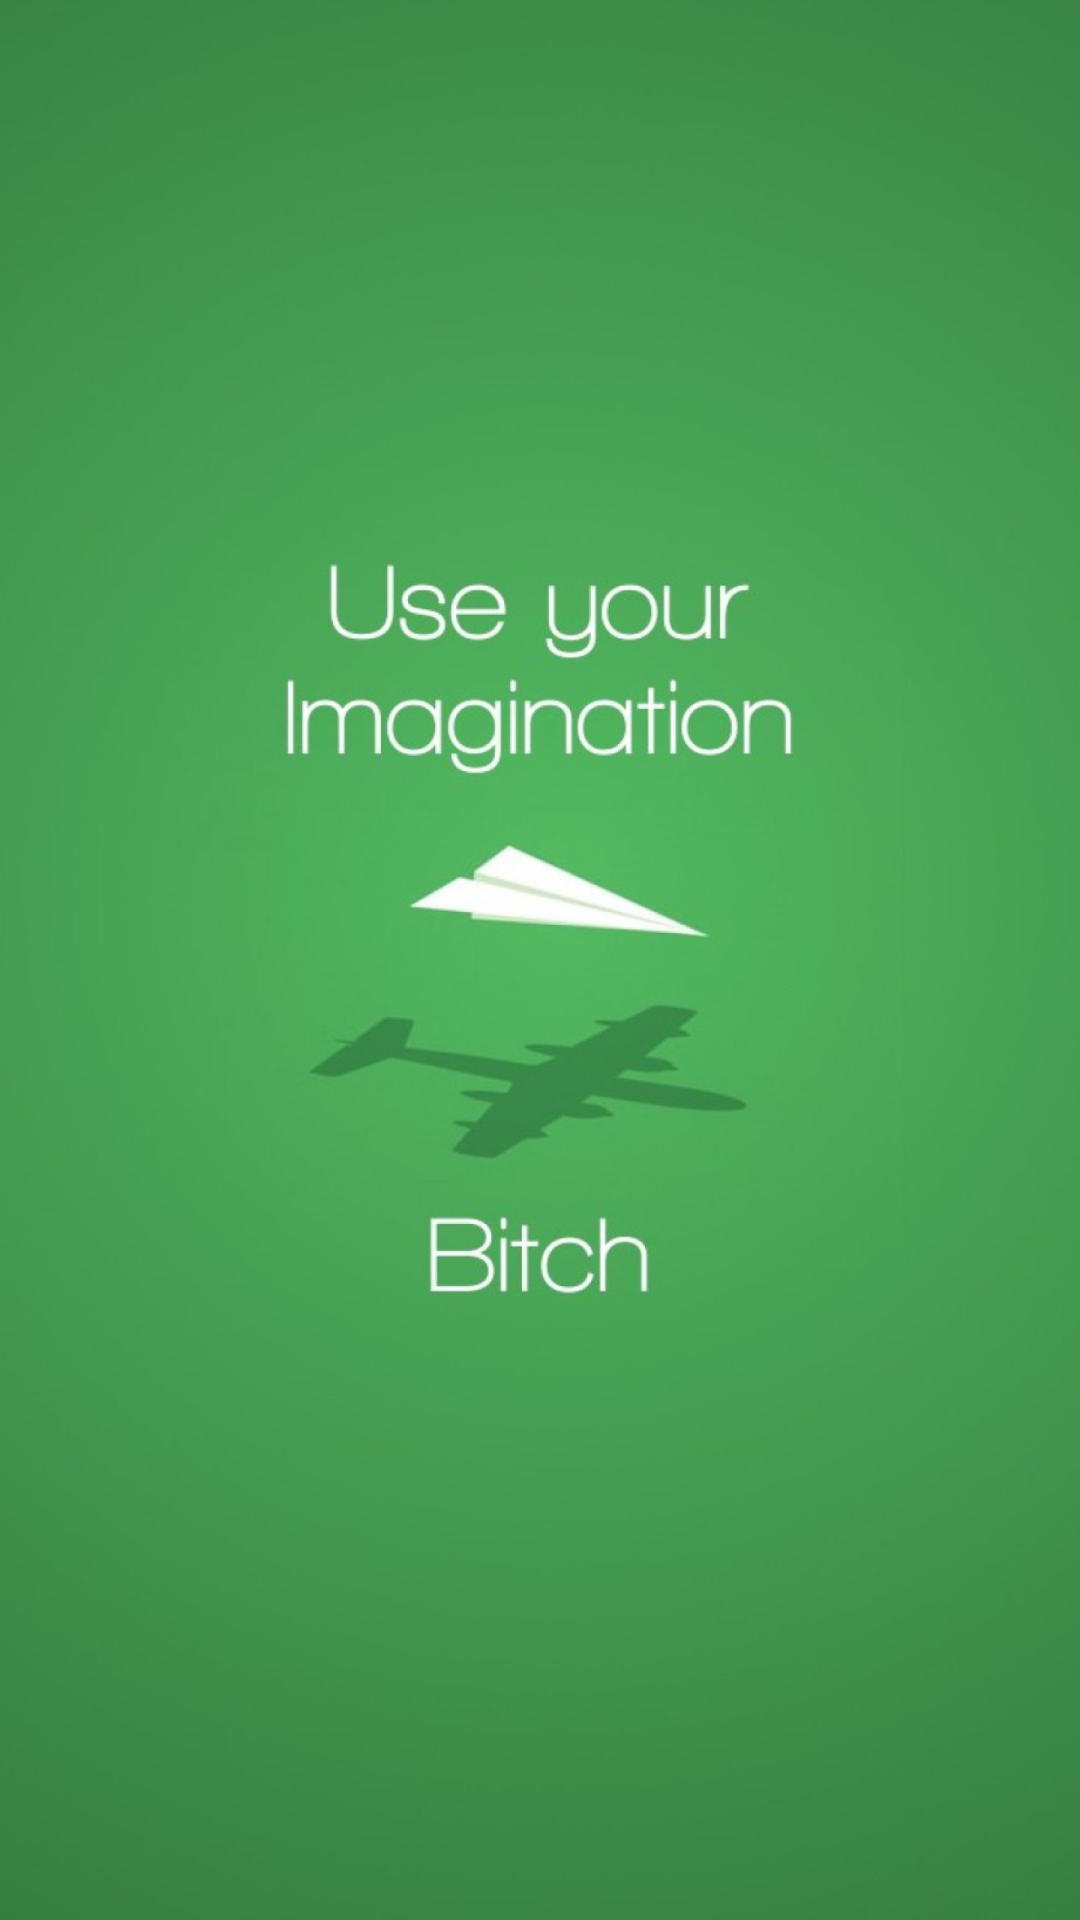 Use Your Imagination wallpaper 1080x1920